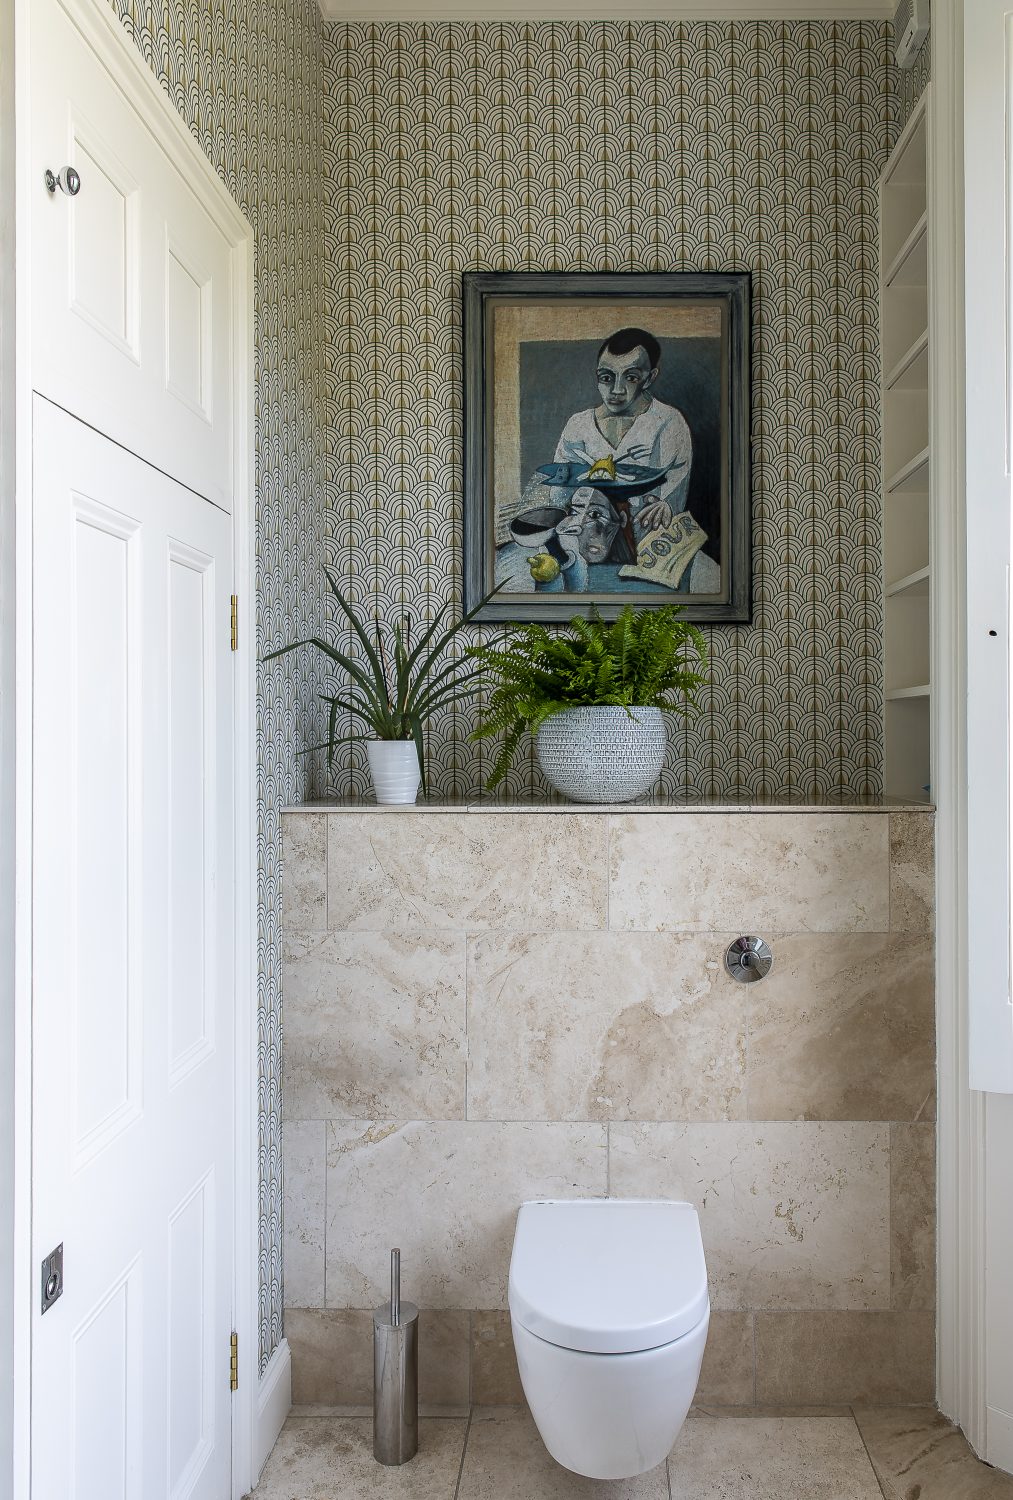 The downstairs loo has been decorated in a stylish contemporary geometric printed wallpaper. A bookcase is packed with Penguin classics, which Olya sourced from eBay. The marble sink is flanked by two wheatsheaf lighting sconces that sit either side of an antique mirror